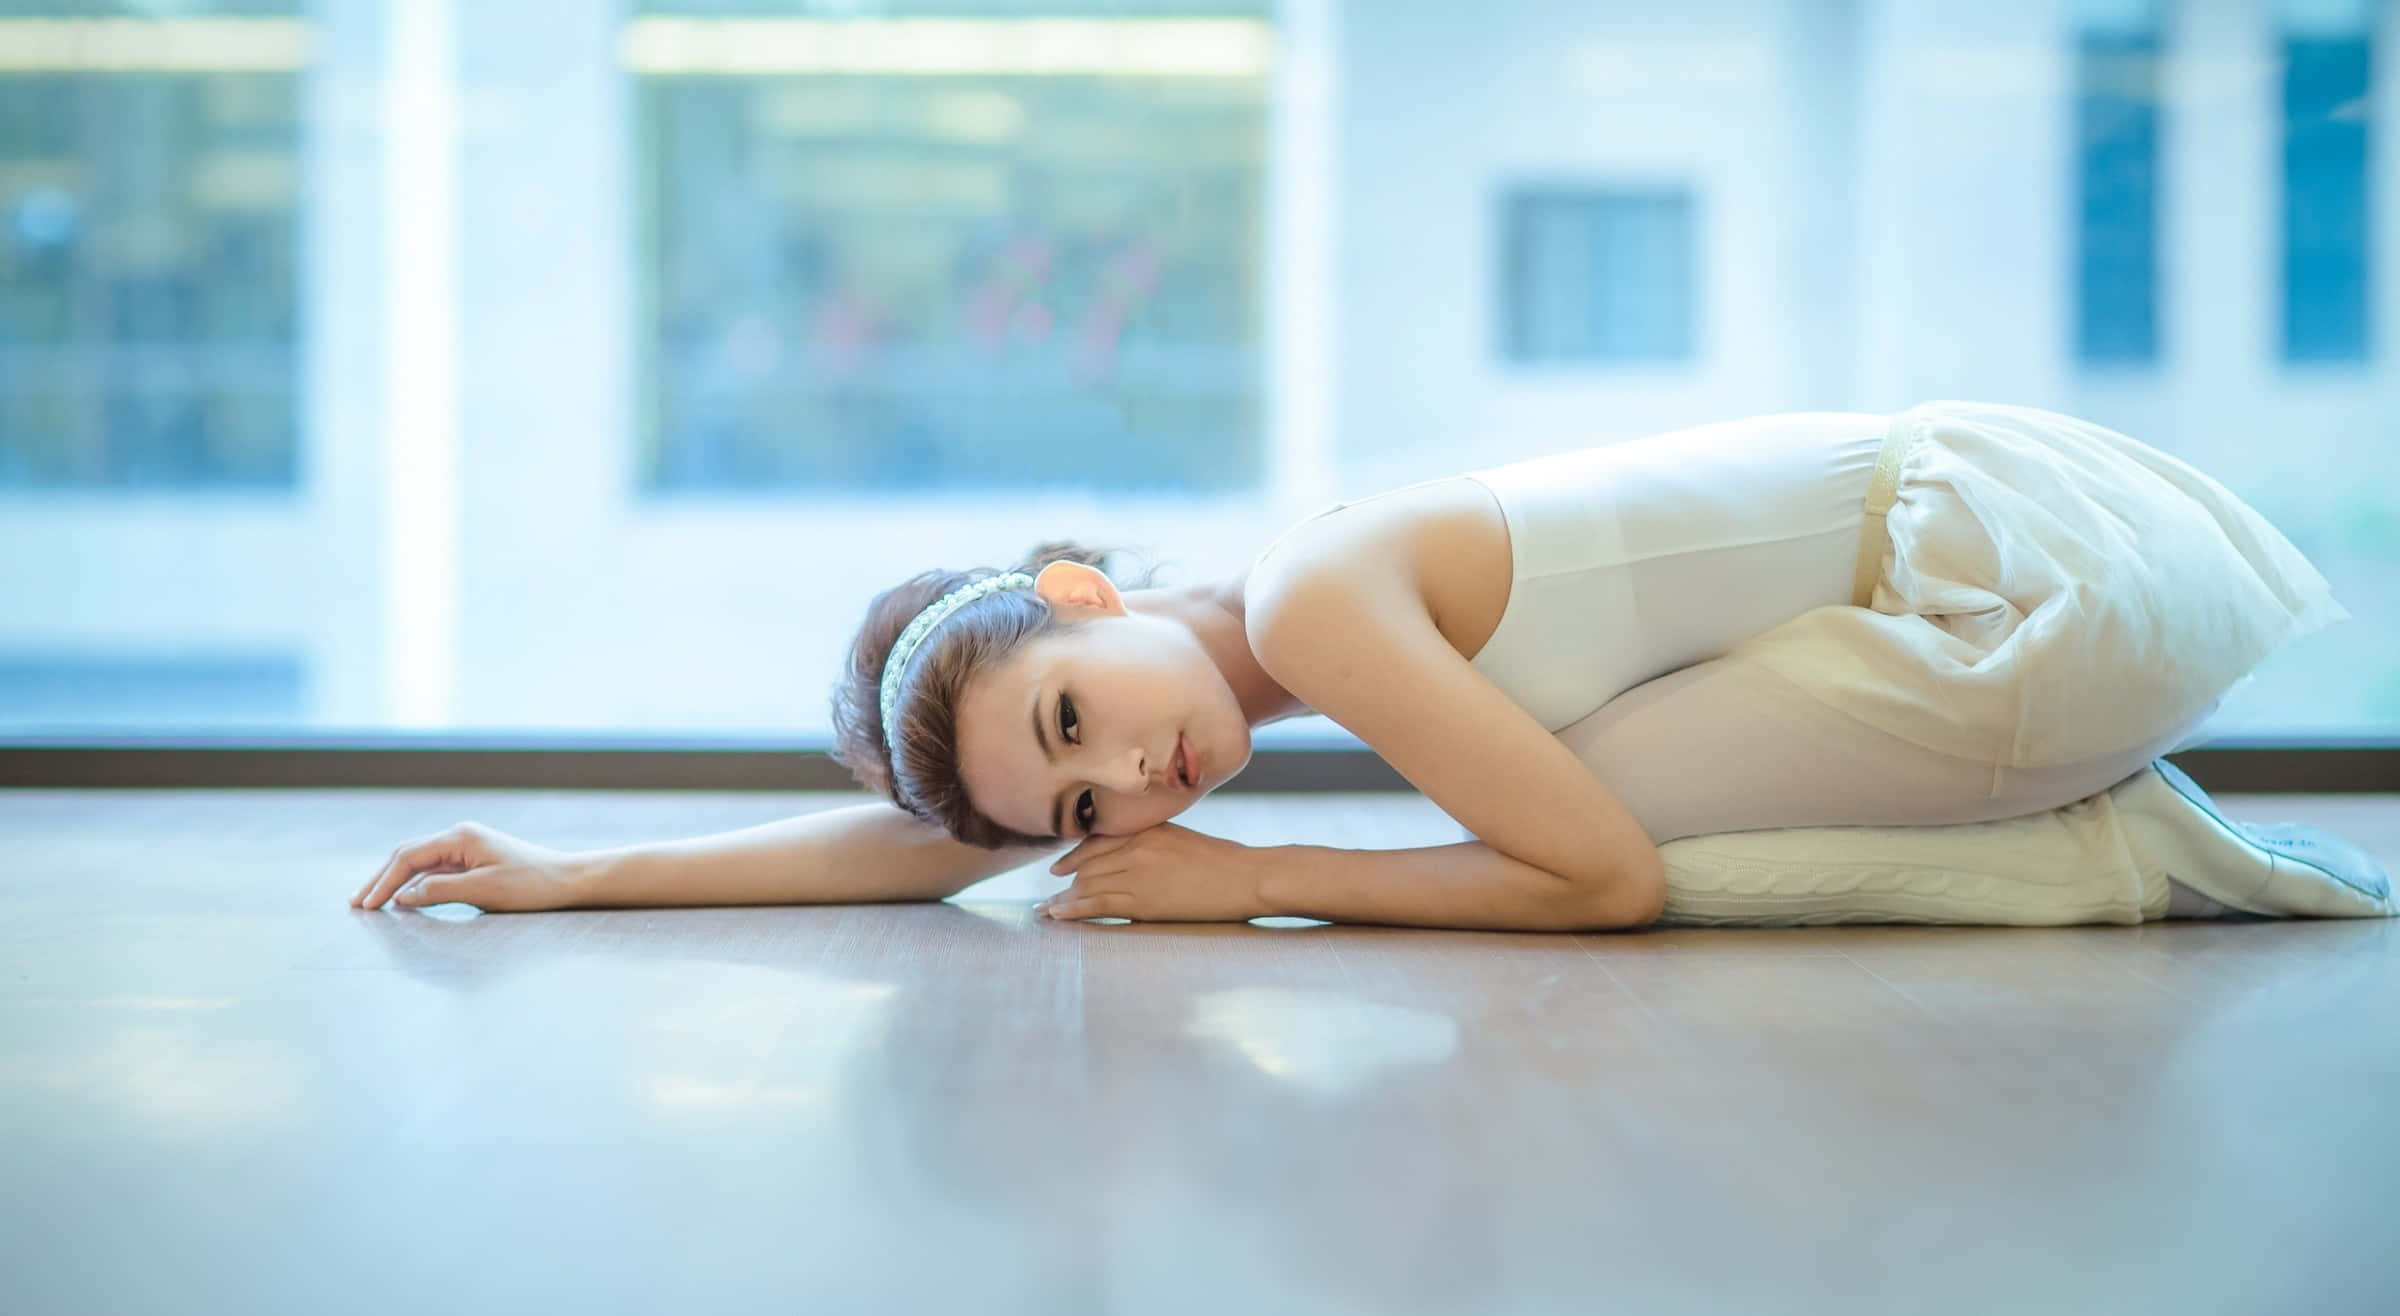 A Young Woman In White Is Laying On The Floor